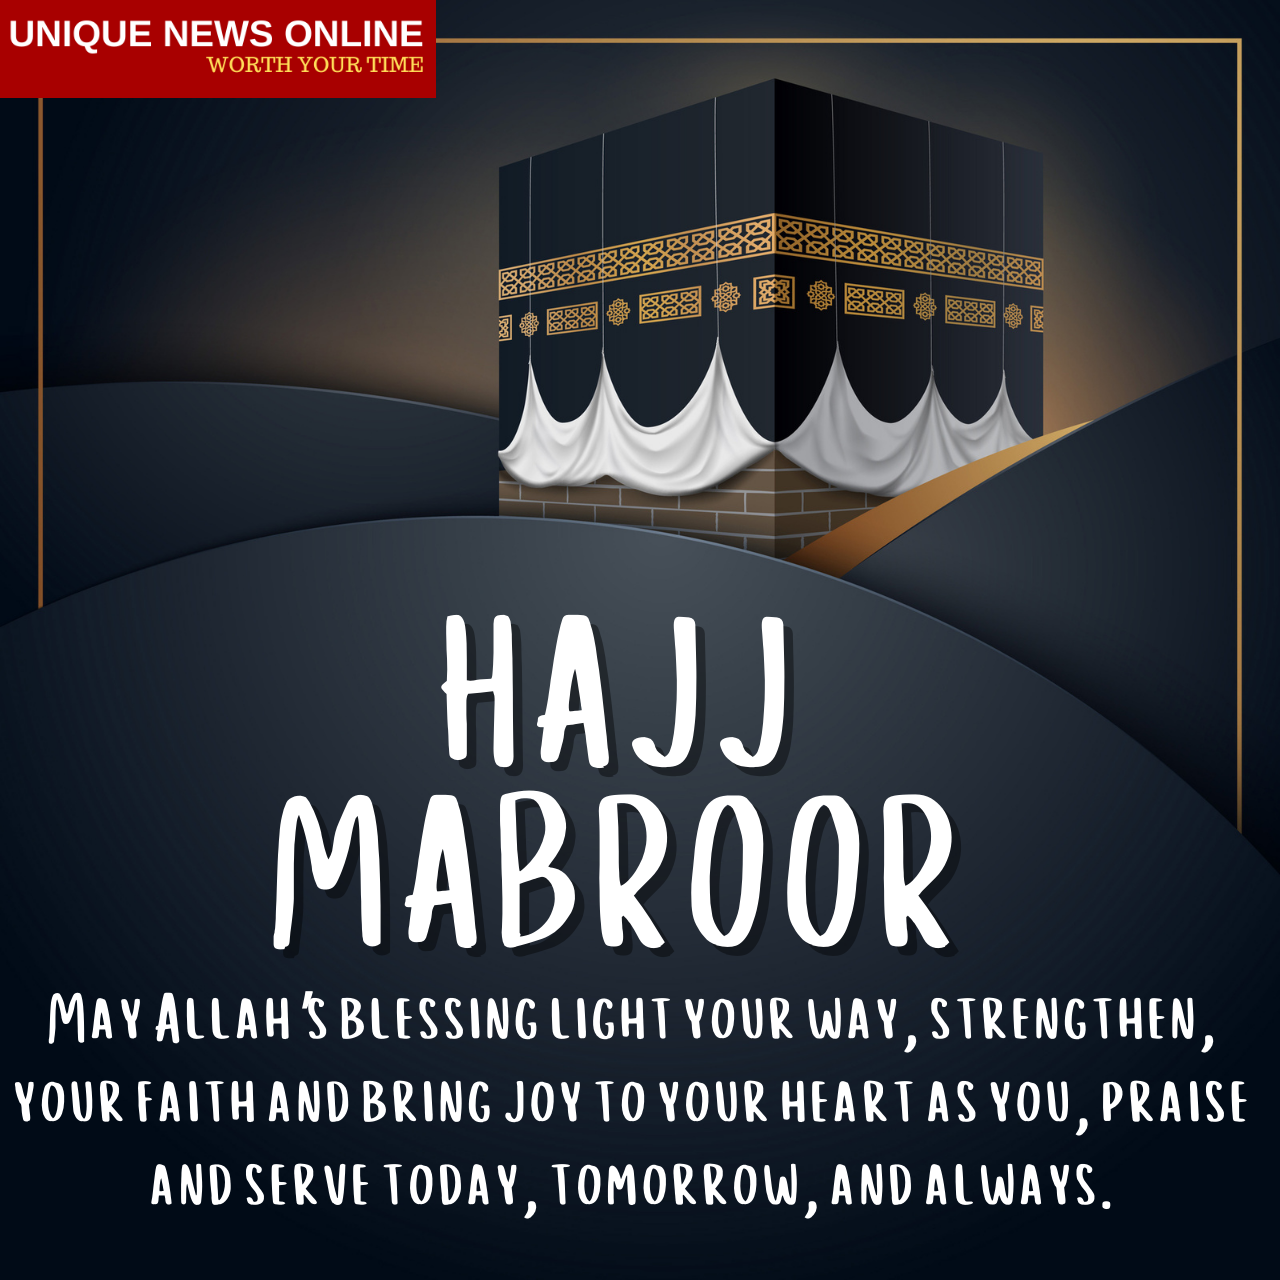 Hajj Mabroor 2021 Arabic Wishes, Quotes, Messages, Status, Pics, Shayari, Greetings, and Dua to share